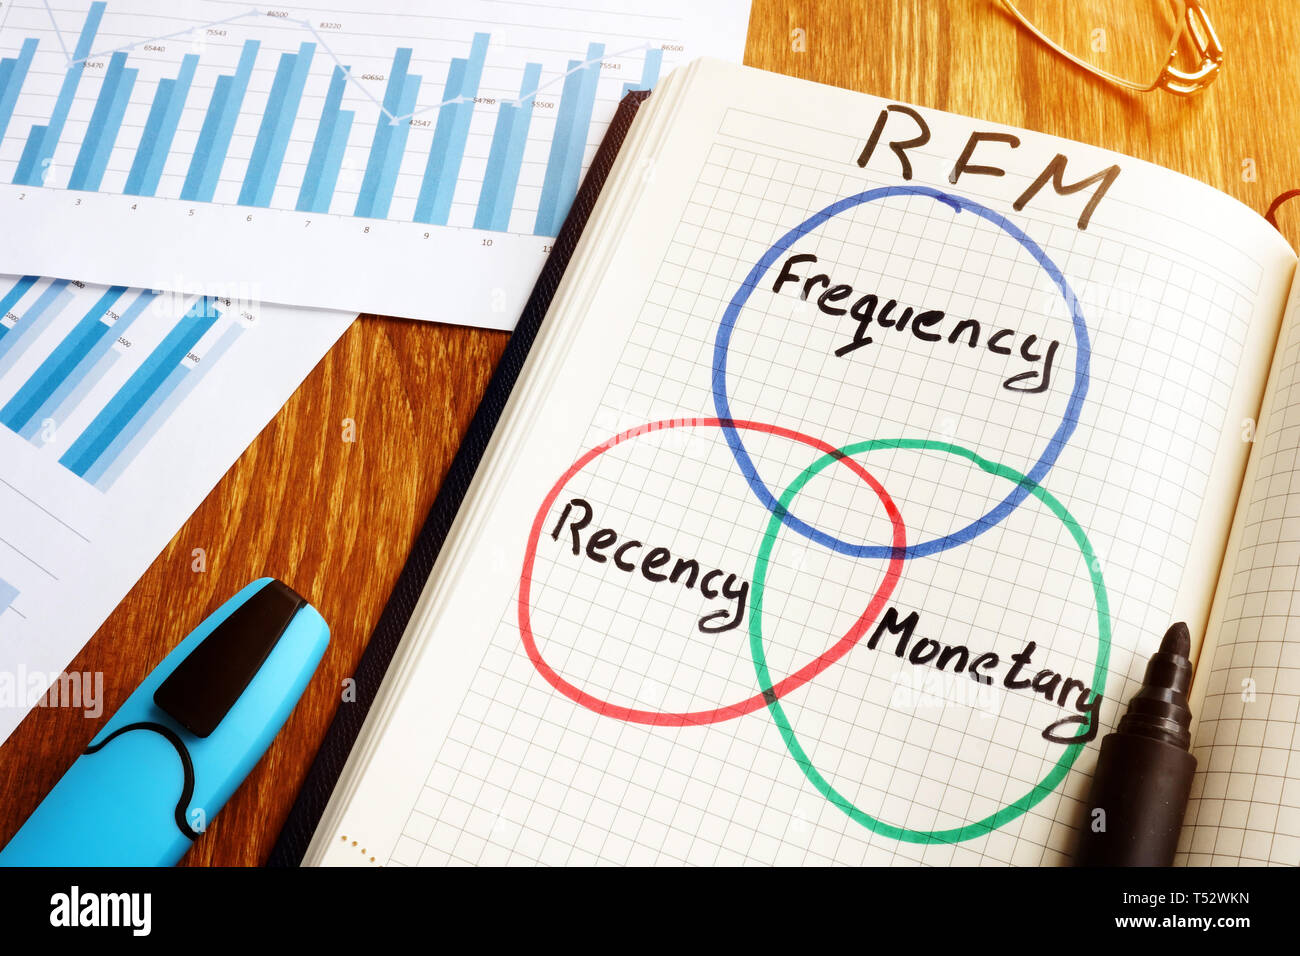 RFM Recency Frequency Monetary Value written in a note. Stock Photo